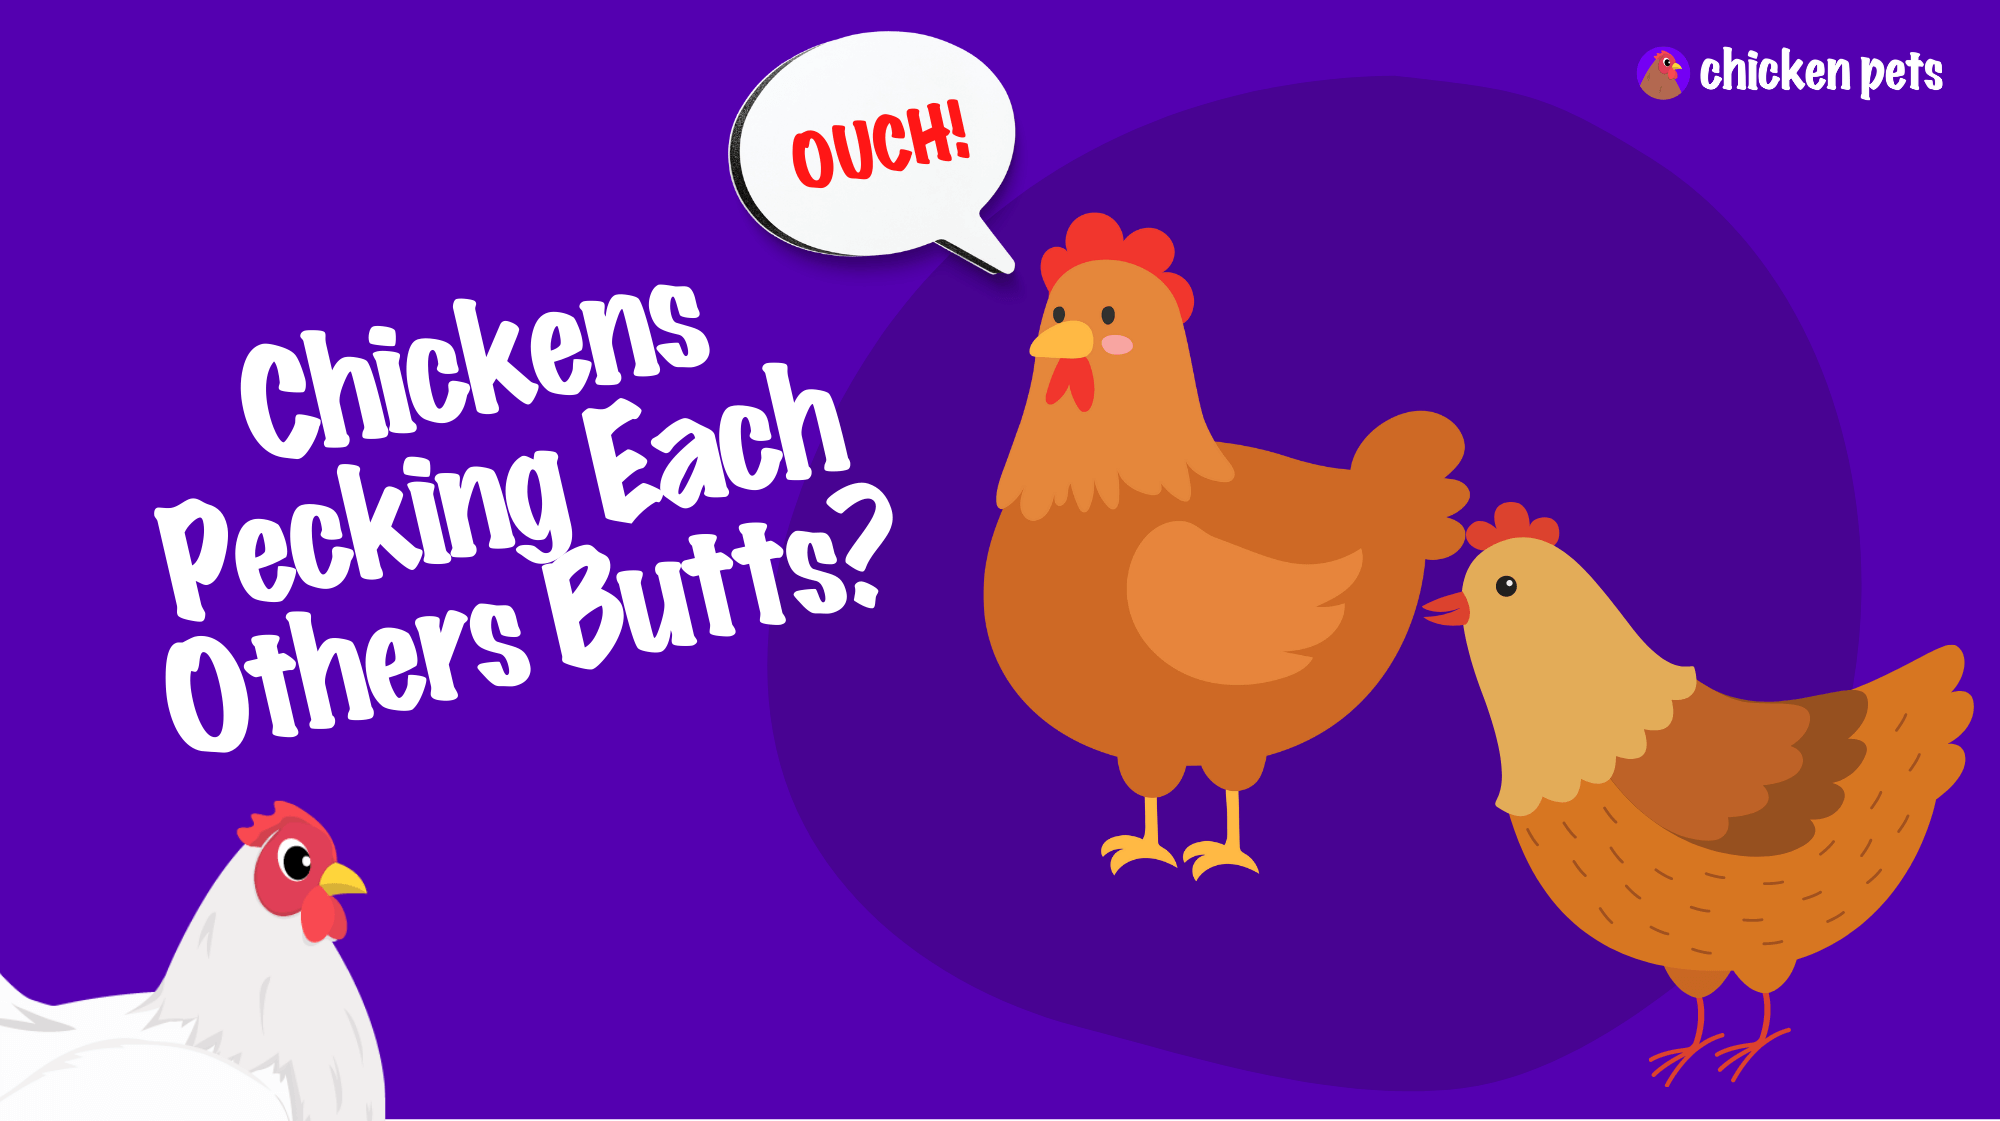 chickens pecking each others butts